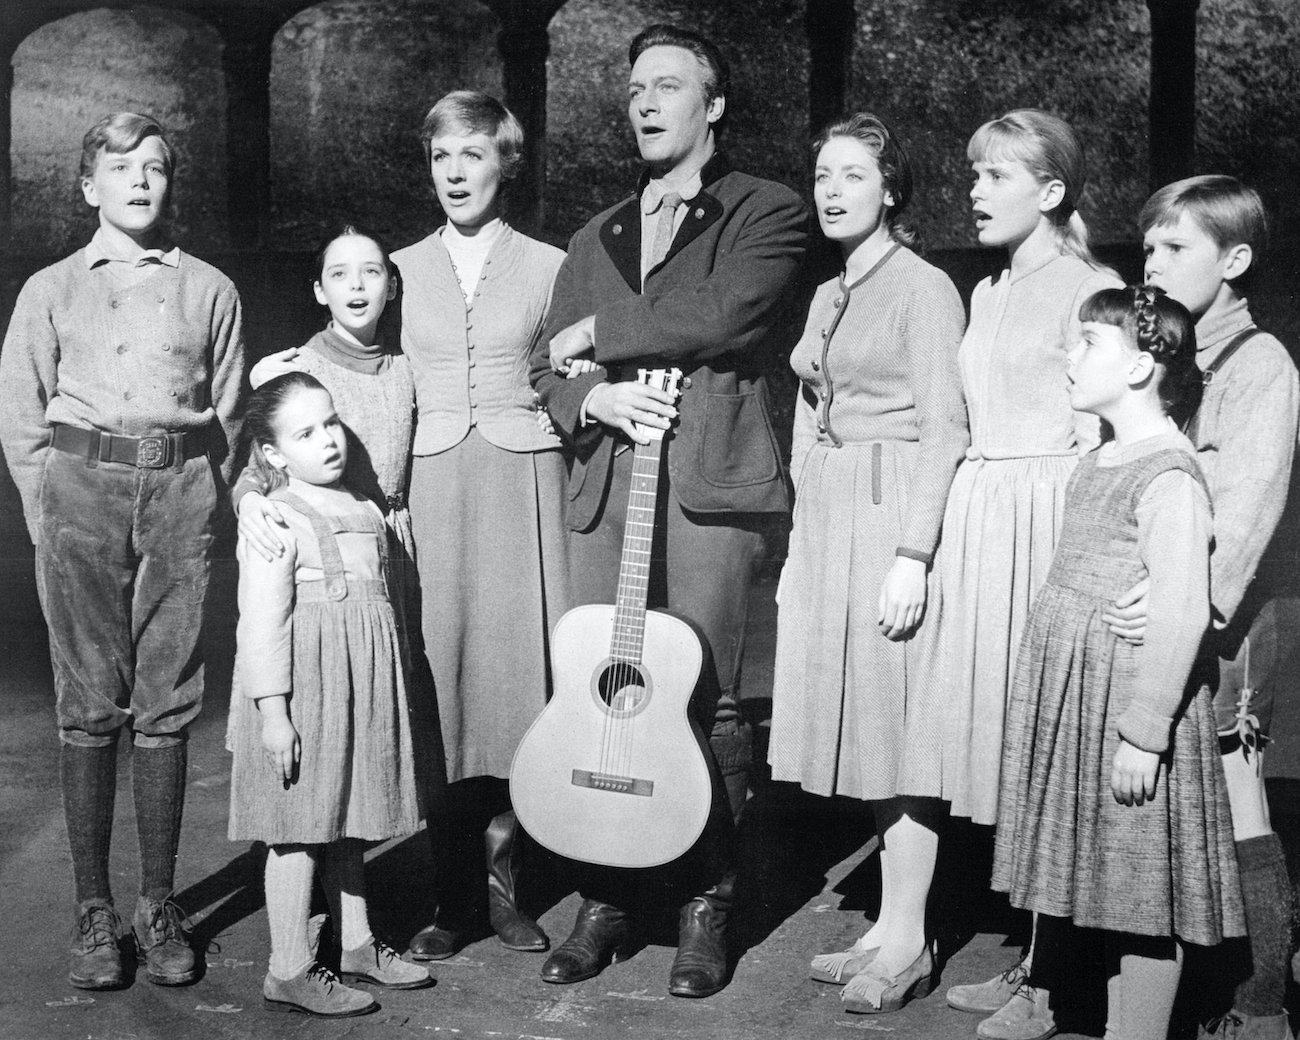 The Sound of Music cast in a promotional portrait